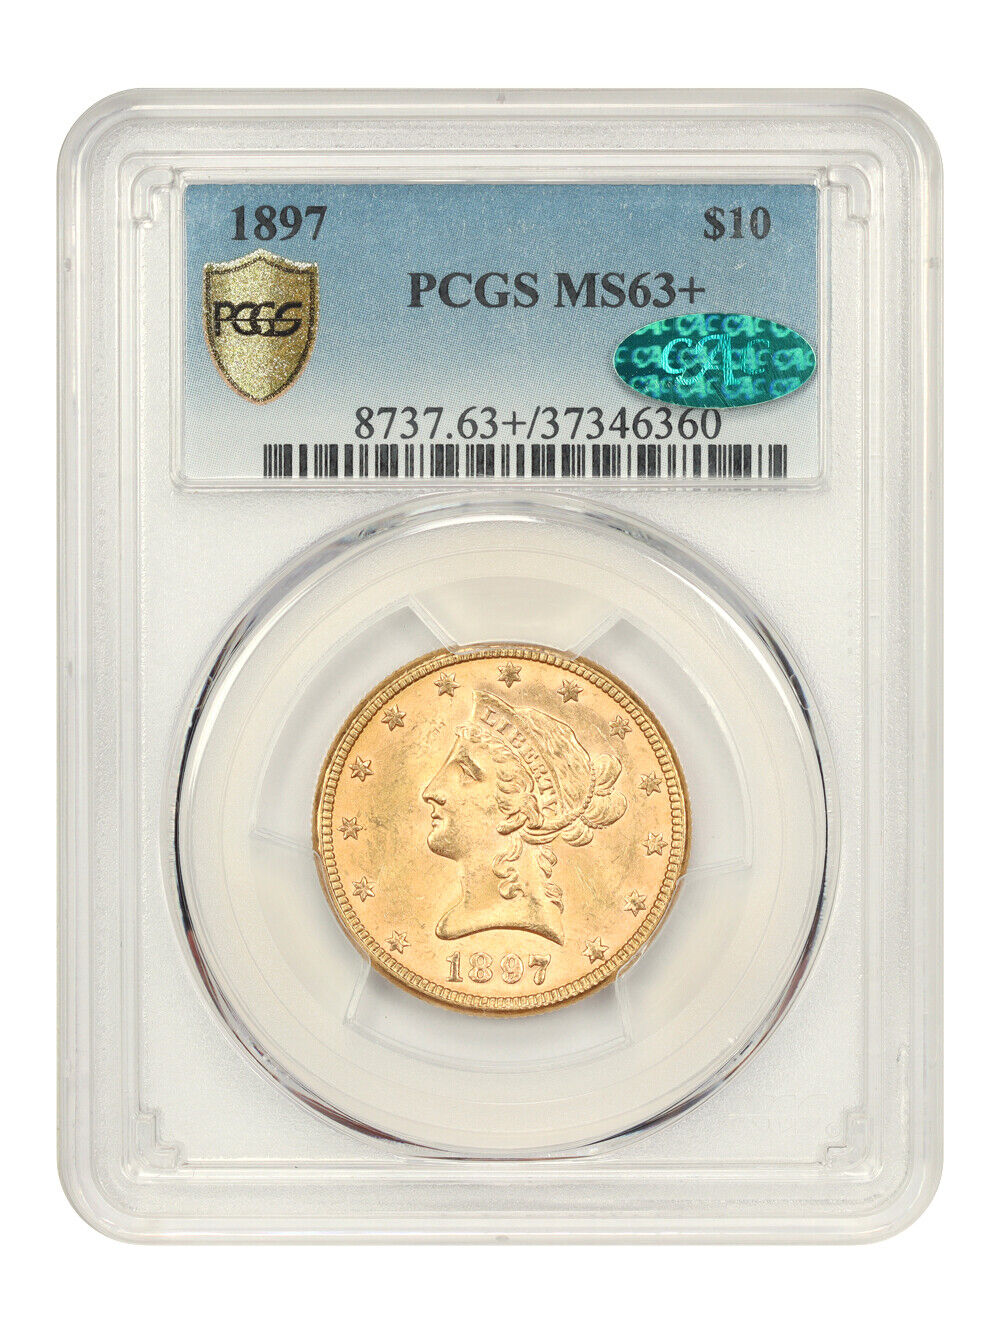 1897 $10 Pcgs/cac Ms63+ Lovely! - Liberty Eagle - Gold Coin - Lovely!